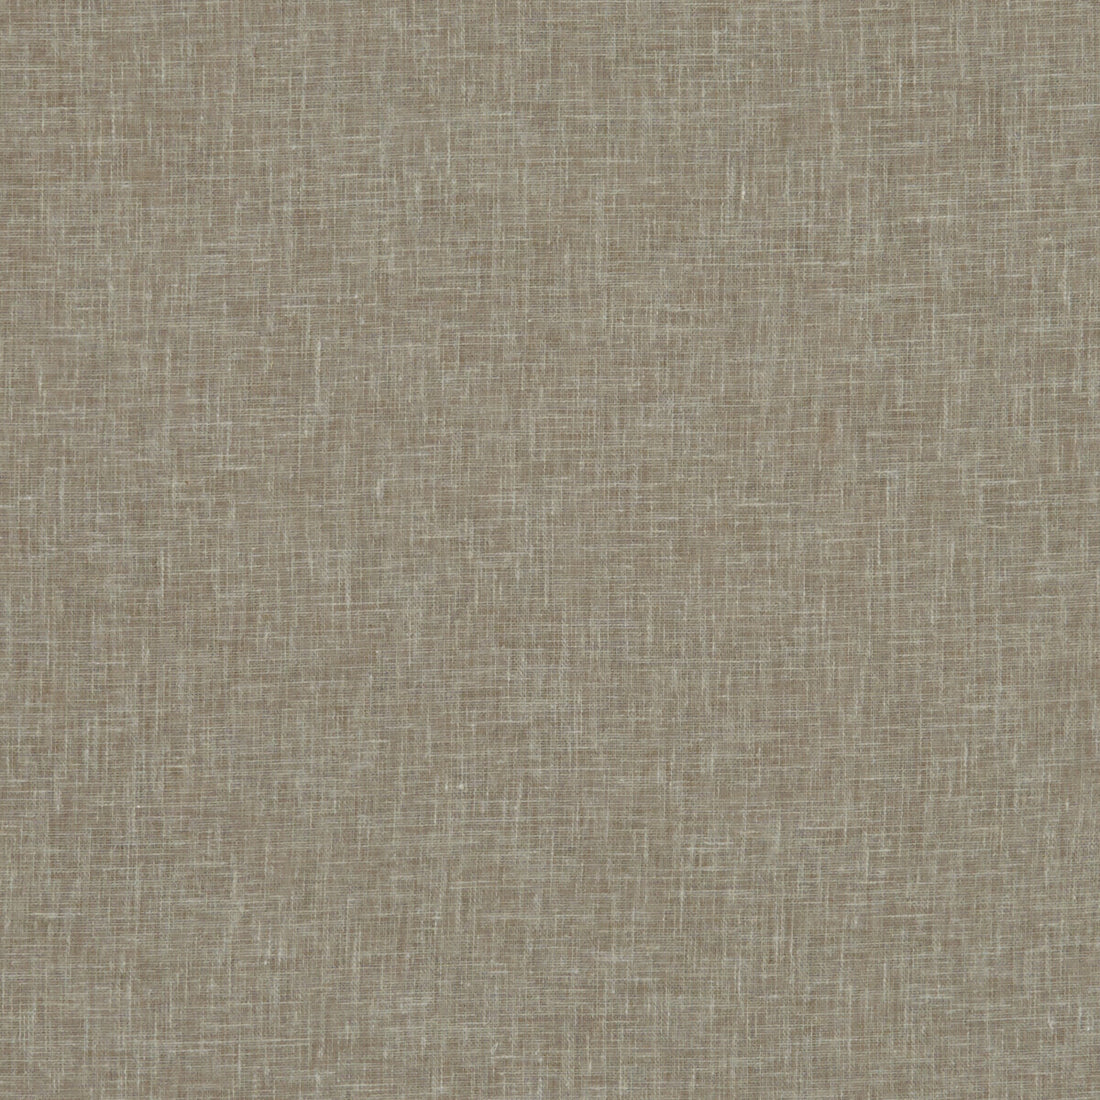 Midori fabric in mocha color - pattern F1068/29.CAC.0 - by Clarke And Clarke in the Clarke &amp; Clarke Midori collection